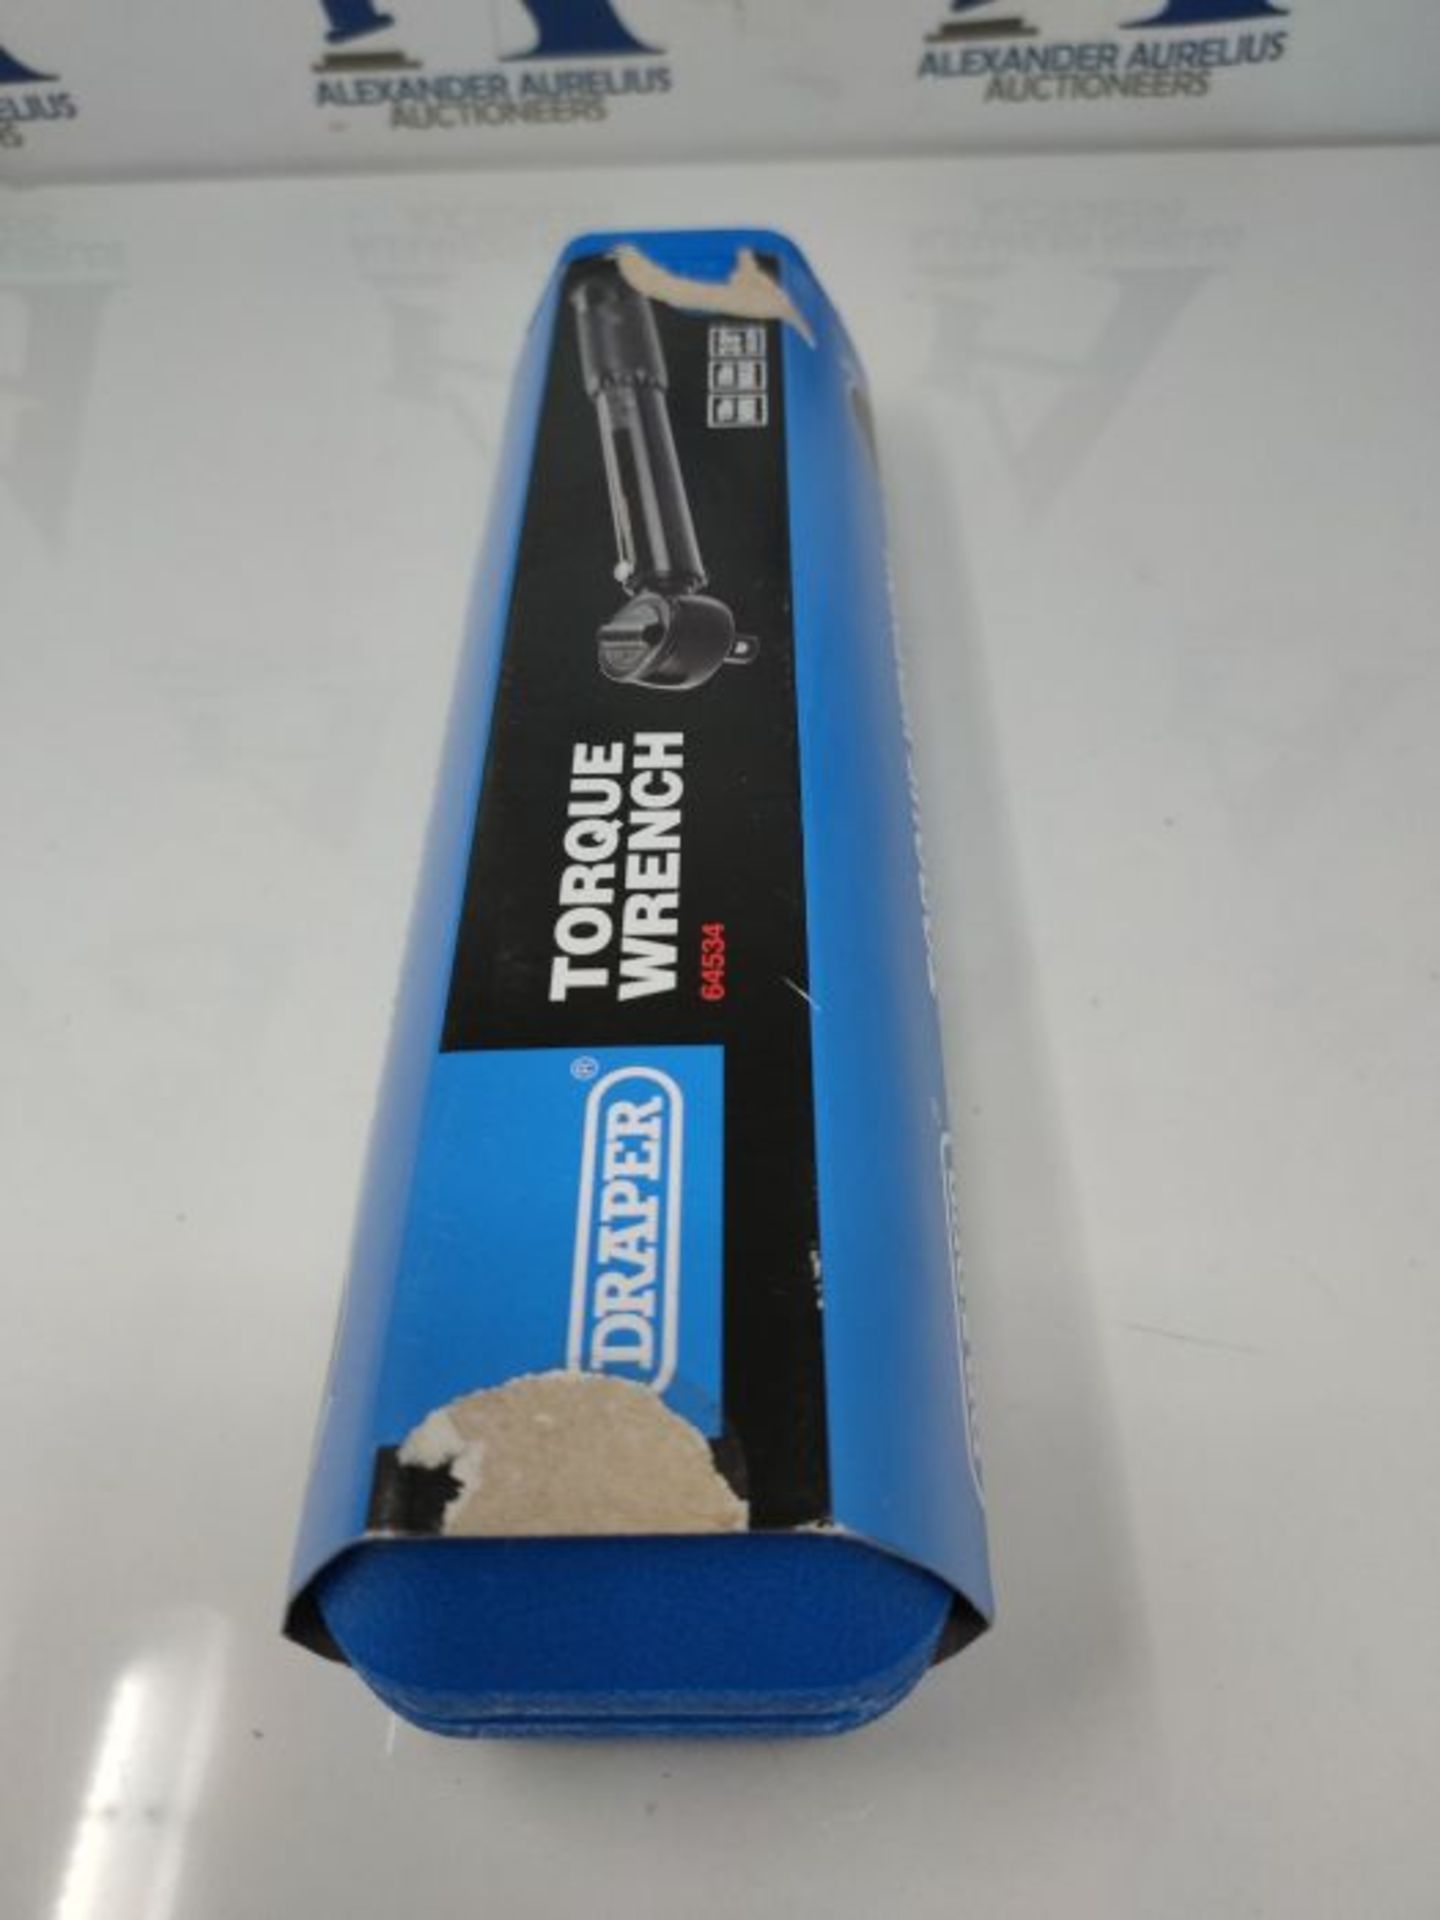 Draper 64534 Square Drive Ratchet Torque Wrench 3/8 Inch , Blue - Image 2 of 3